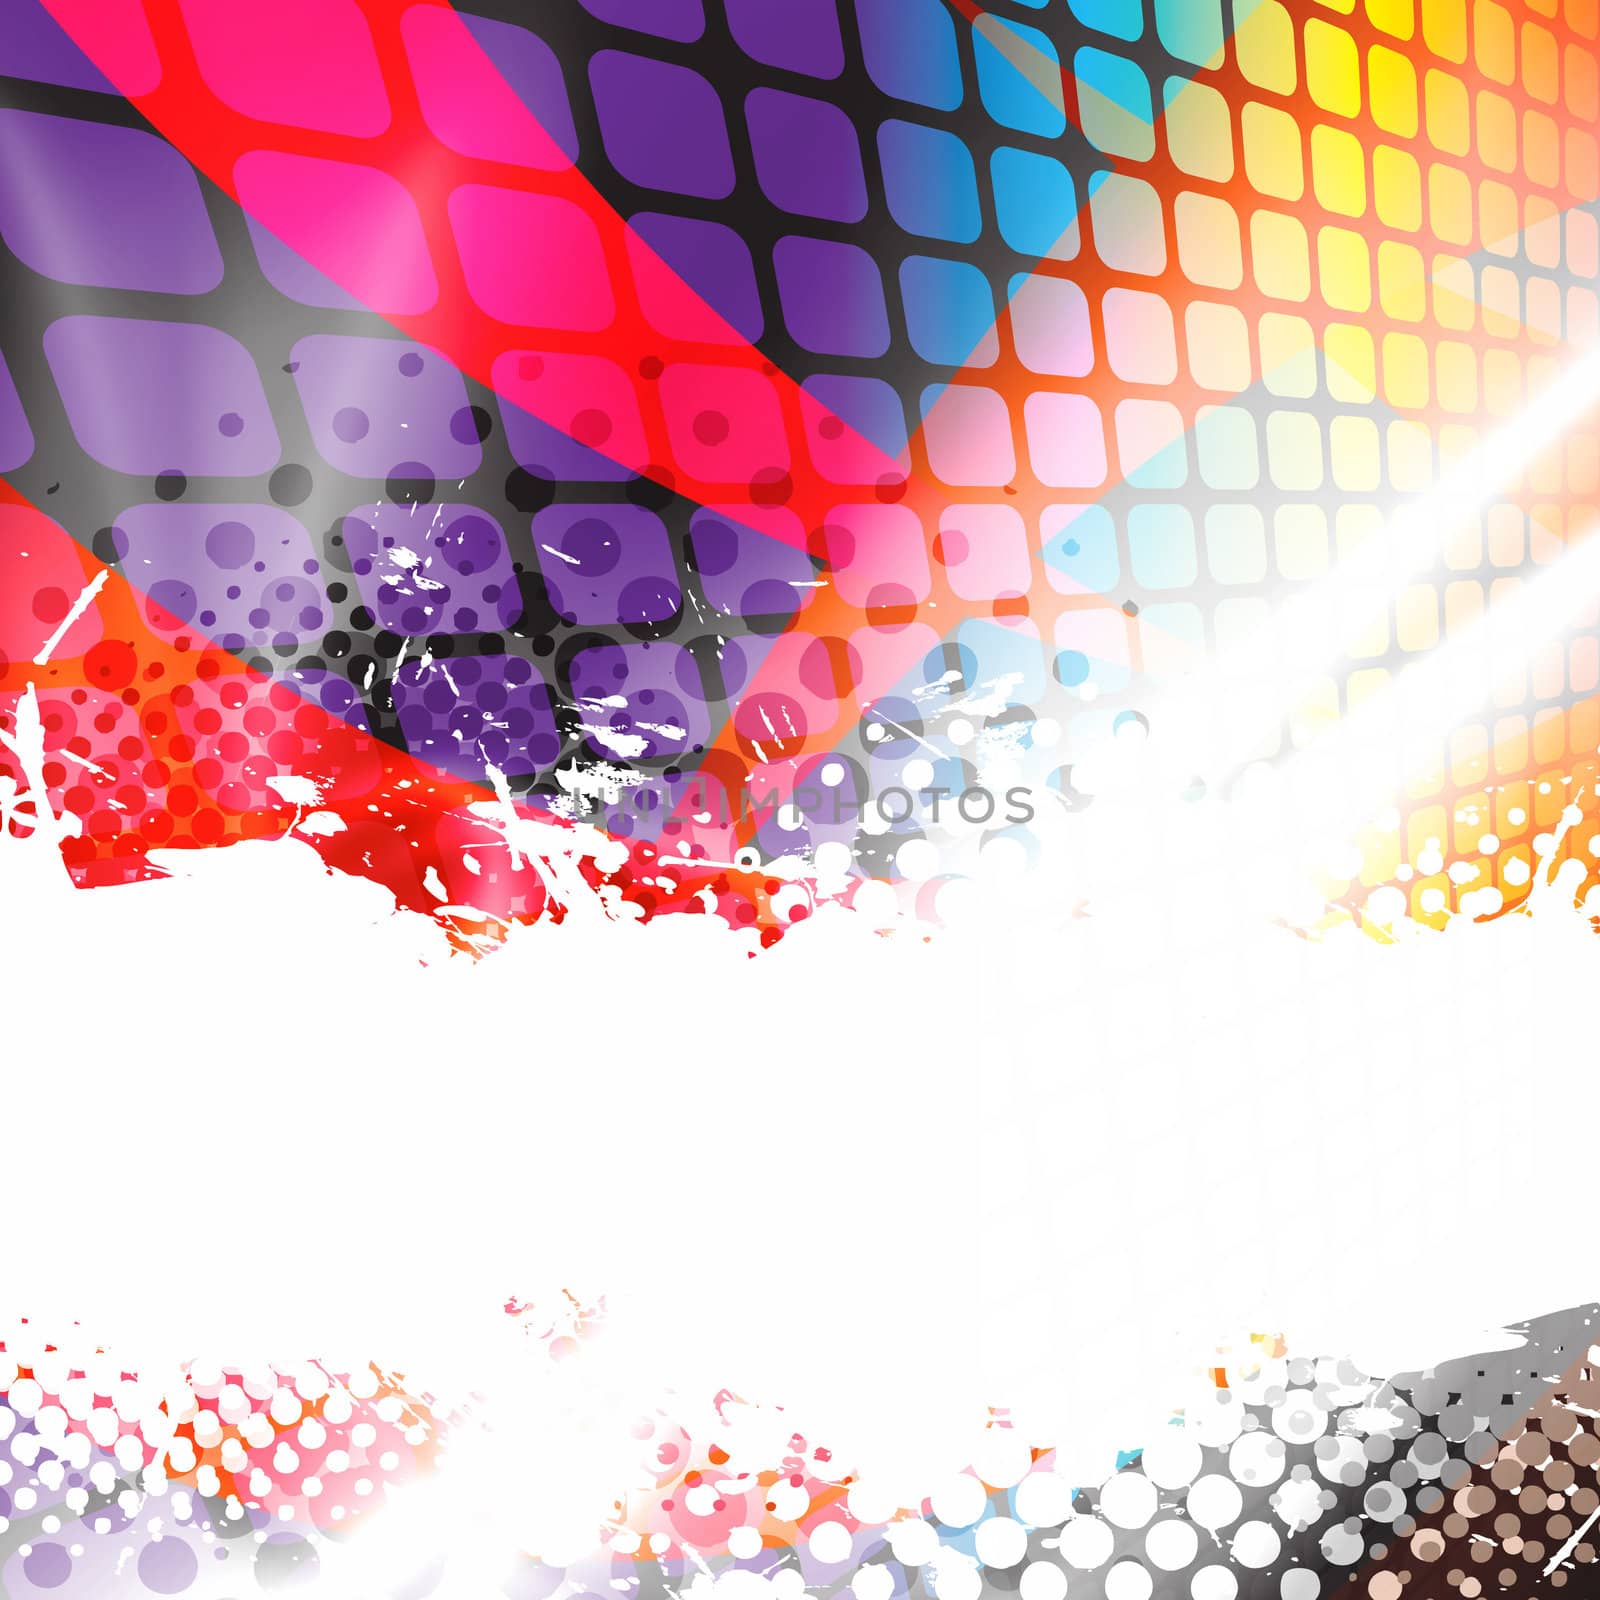 A colorful abstract background layout with halftone dots and negative space.